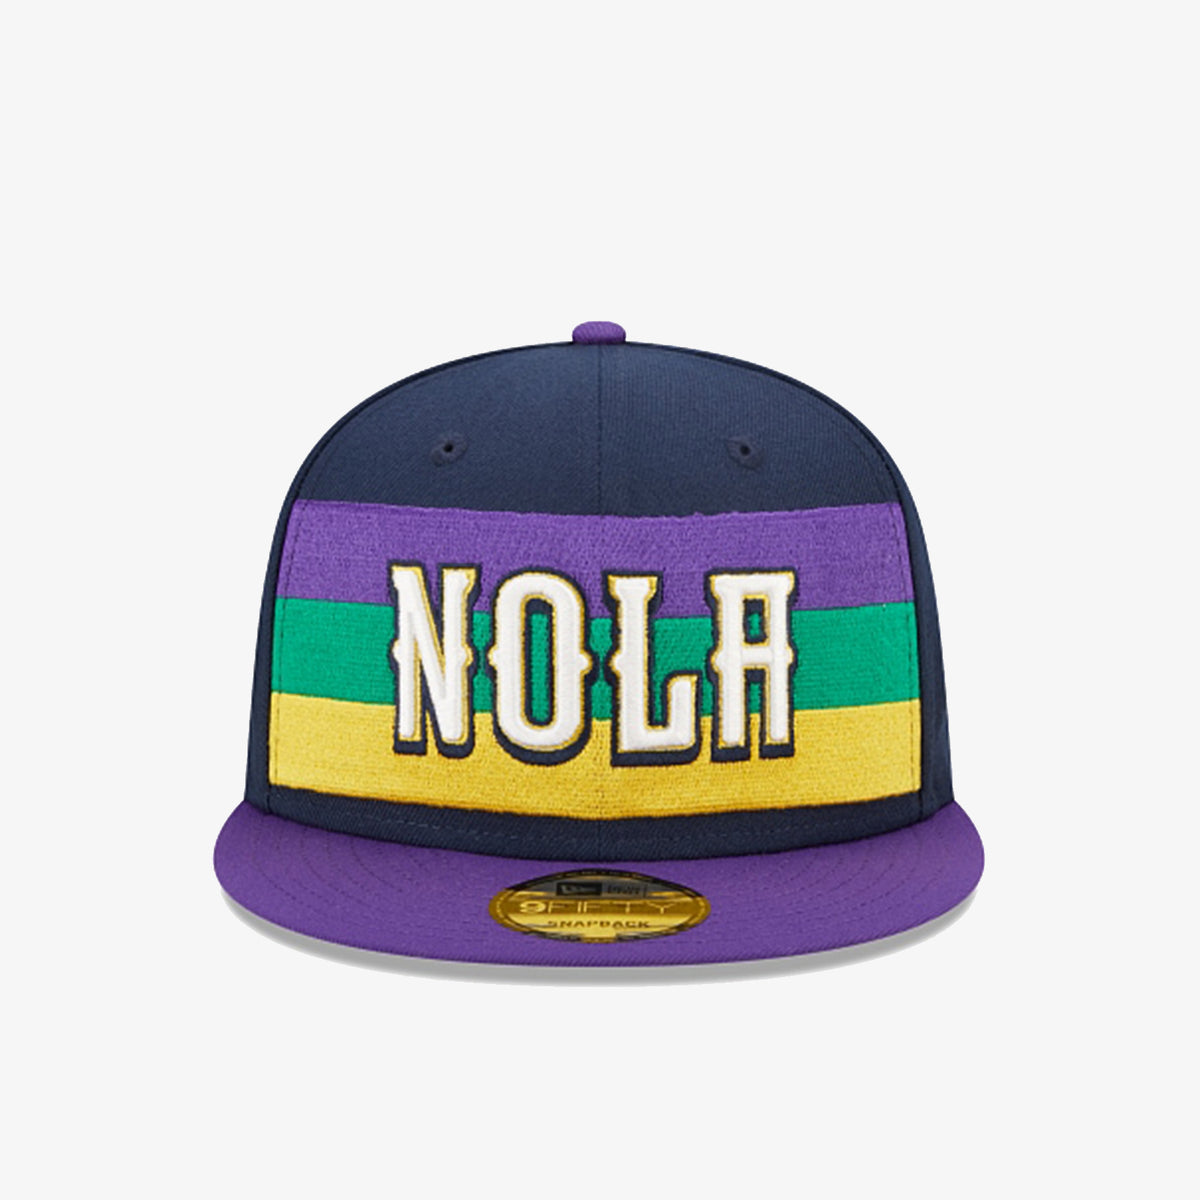 New Orleans Pelicans 9Fifty City Edition Snapback